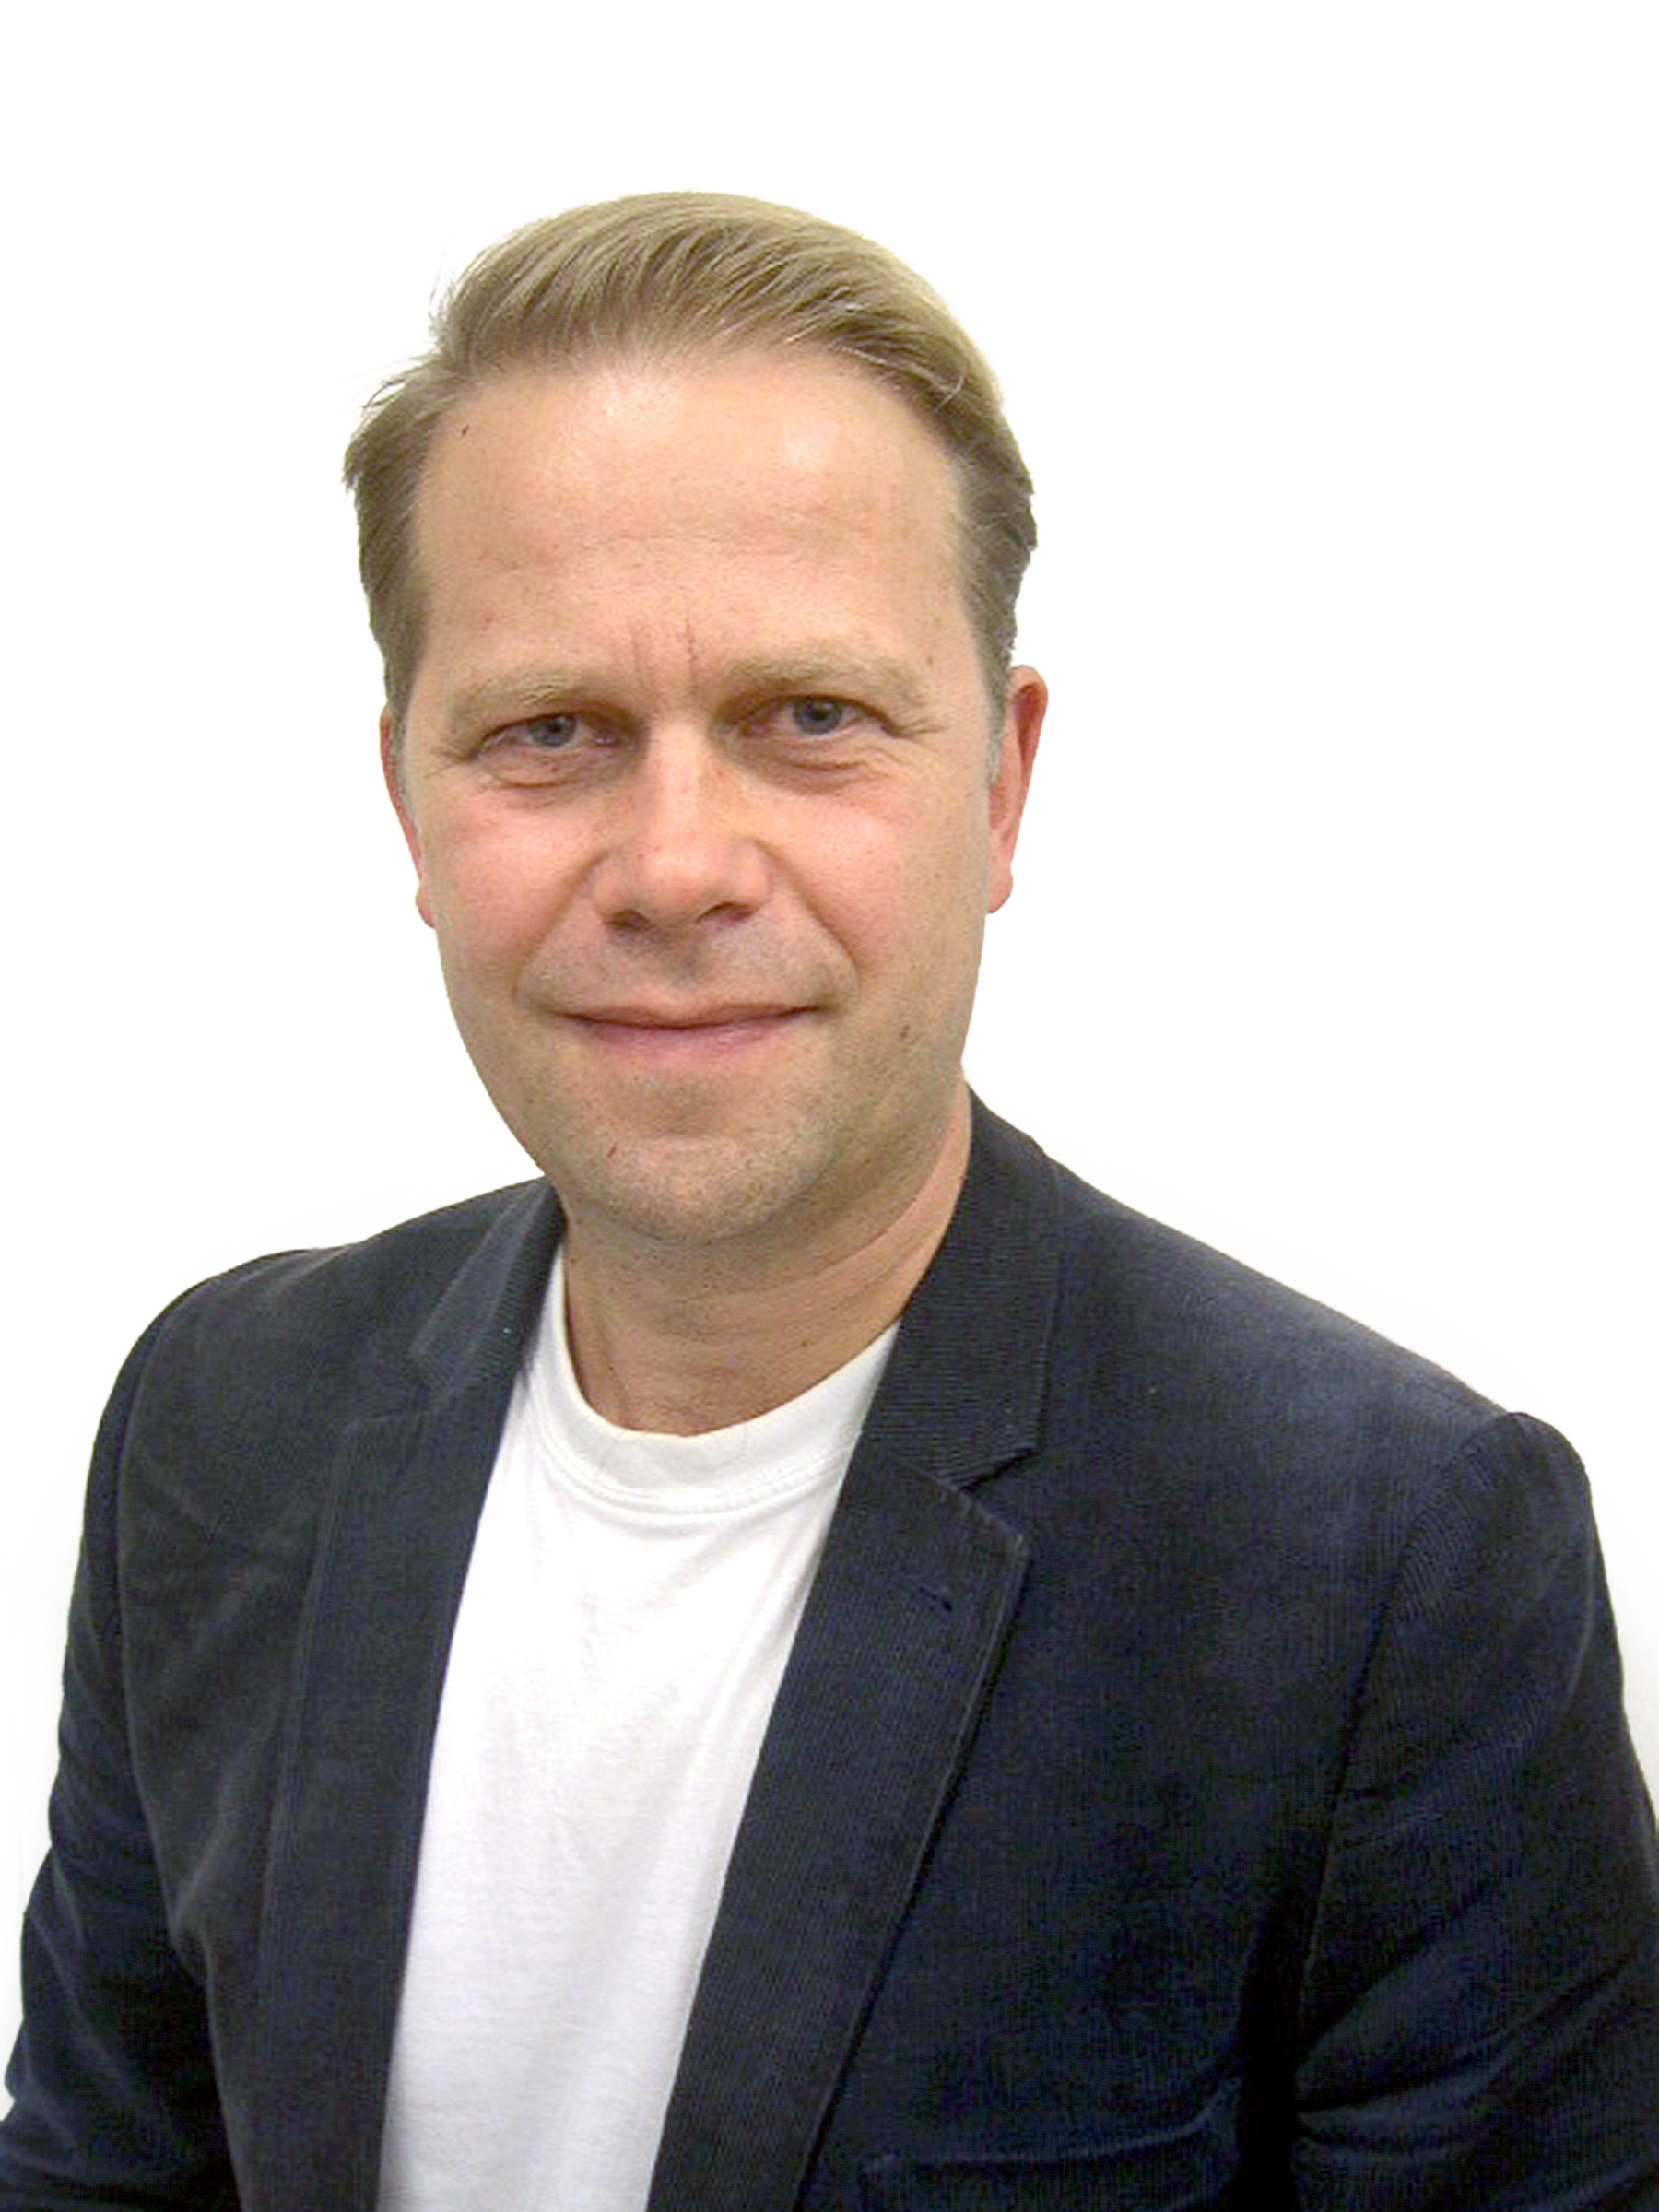 Anders Petterson, Founder of ArtTactic